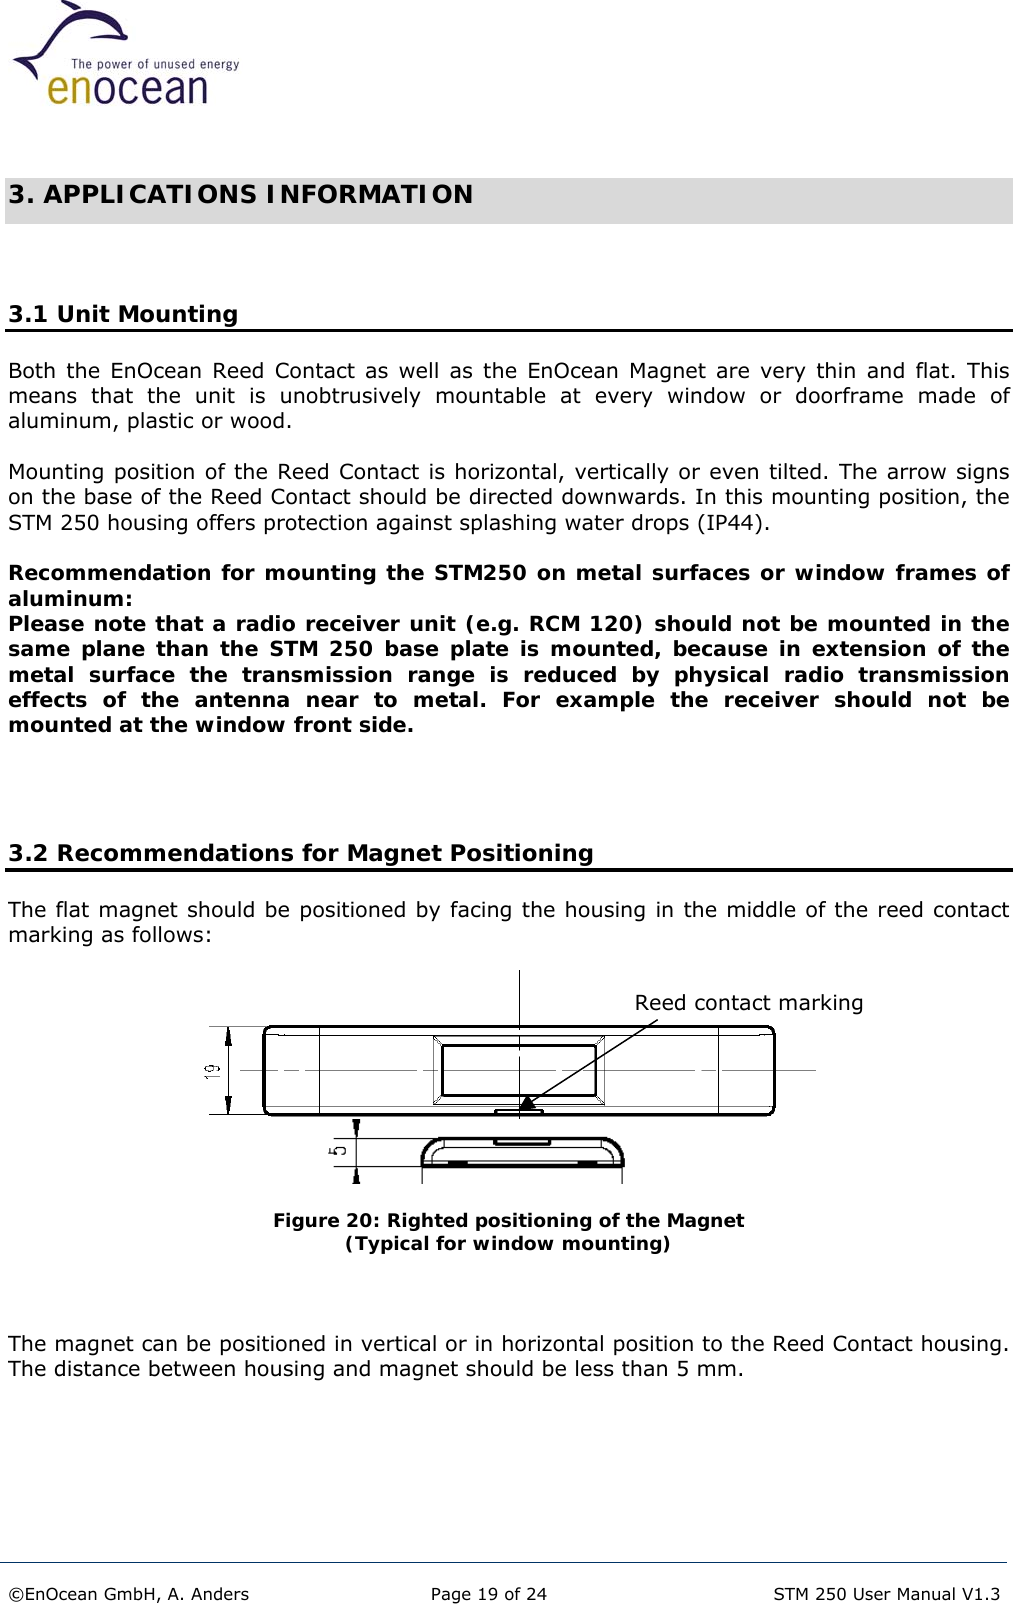   3. APPLICATIONS INFORMATION   3.1 Unit Mounting Both the EnOcean Reed Contact as well as the EnOcean Magnet are very thin and flat. This means that the unit is unobtrusively mountable at every window or doorframe made of aluminum, plastic or wood.  Mounting position of the Reed Contact is horizontal, vertically or even tilted. The arrow signs on the base of the Reed Contact should be directed downwards. In this mounting position, the STM 250 housing offers protection against splashing water drops (IP44).  Recommendation for mounting the STM250 on metal surfaces or window frames of aluminum: Please note that a radio receiver unit (e.g. RCM 120) should not be mounted in the same plane than the STM 250 base plate is mounted, because in extension of the metal surface the transmission range is reduced by physical radio transmission effects of the antenna near to metal. For example the receiver should not be mounted at the window front side.     3.2 Recommendations for Magnet Positioning The flat magnet should be positioned by facing the housing in the middle of the reed contact marking as follows:  Reed contact marking    Figure 20: Righted positioning of the Magnet  (Typical for window mounting)    The magnet can be positioned in vertical or in horizontal position to the Reed Contact housing. The distance between housing and magnet should be less than 5 mm.   ©EnOcean GmbH, A. Anders  Page 19 of 24   STM 250 User Manual V1.3  